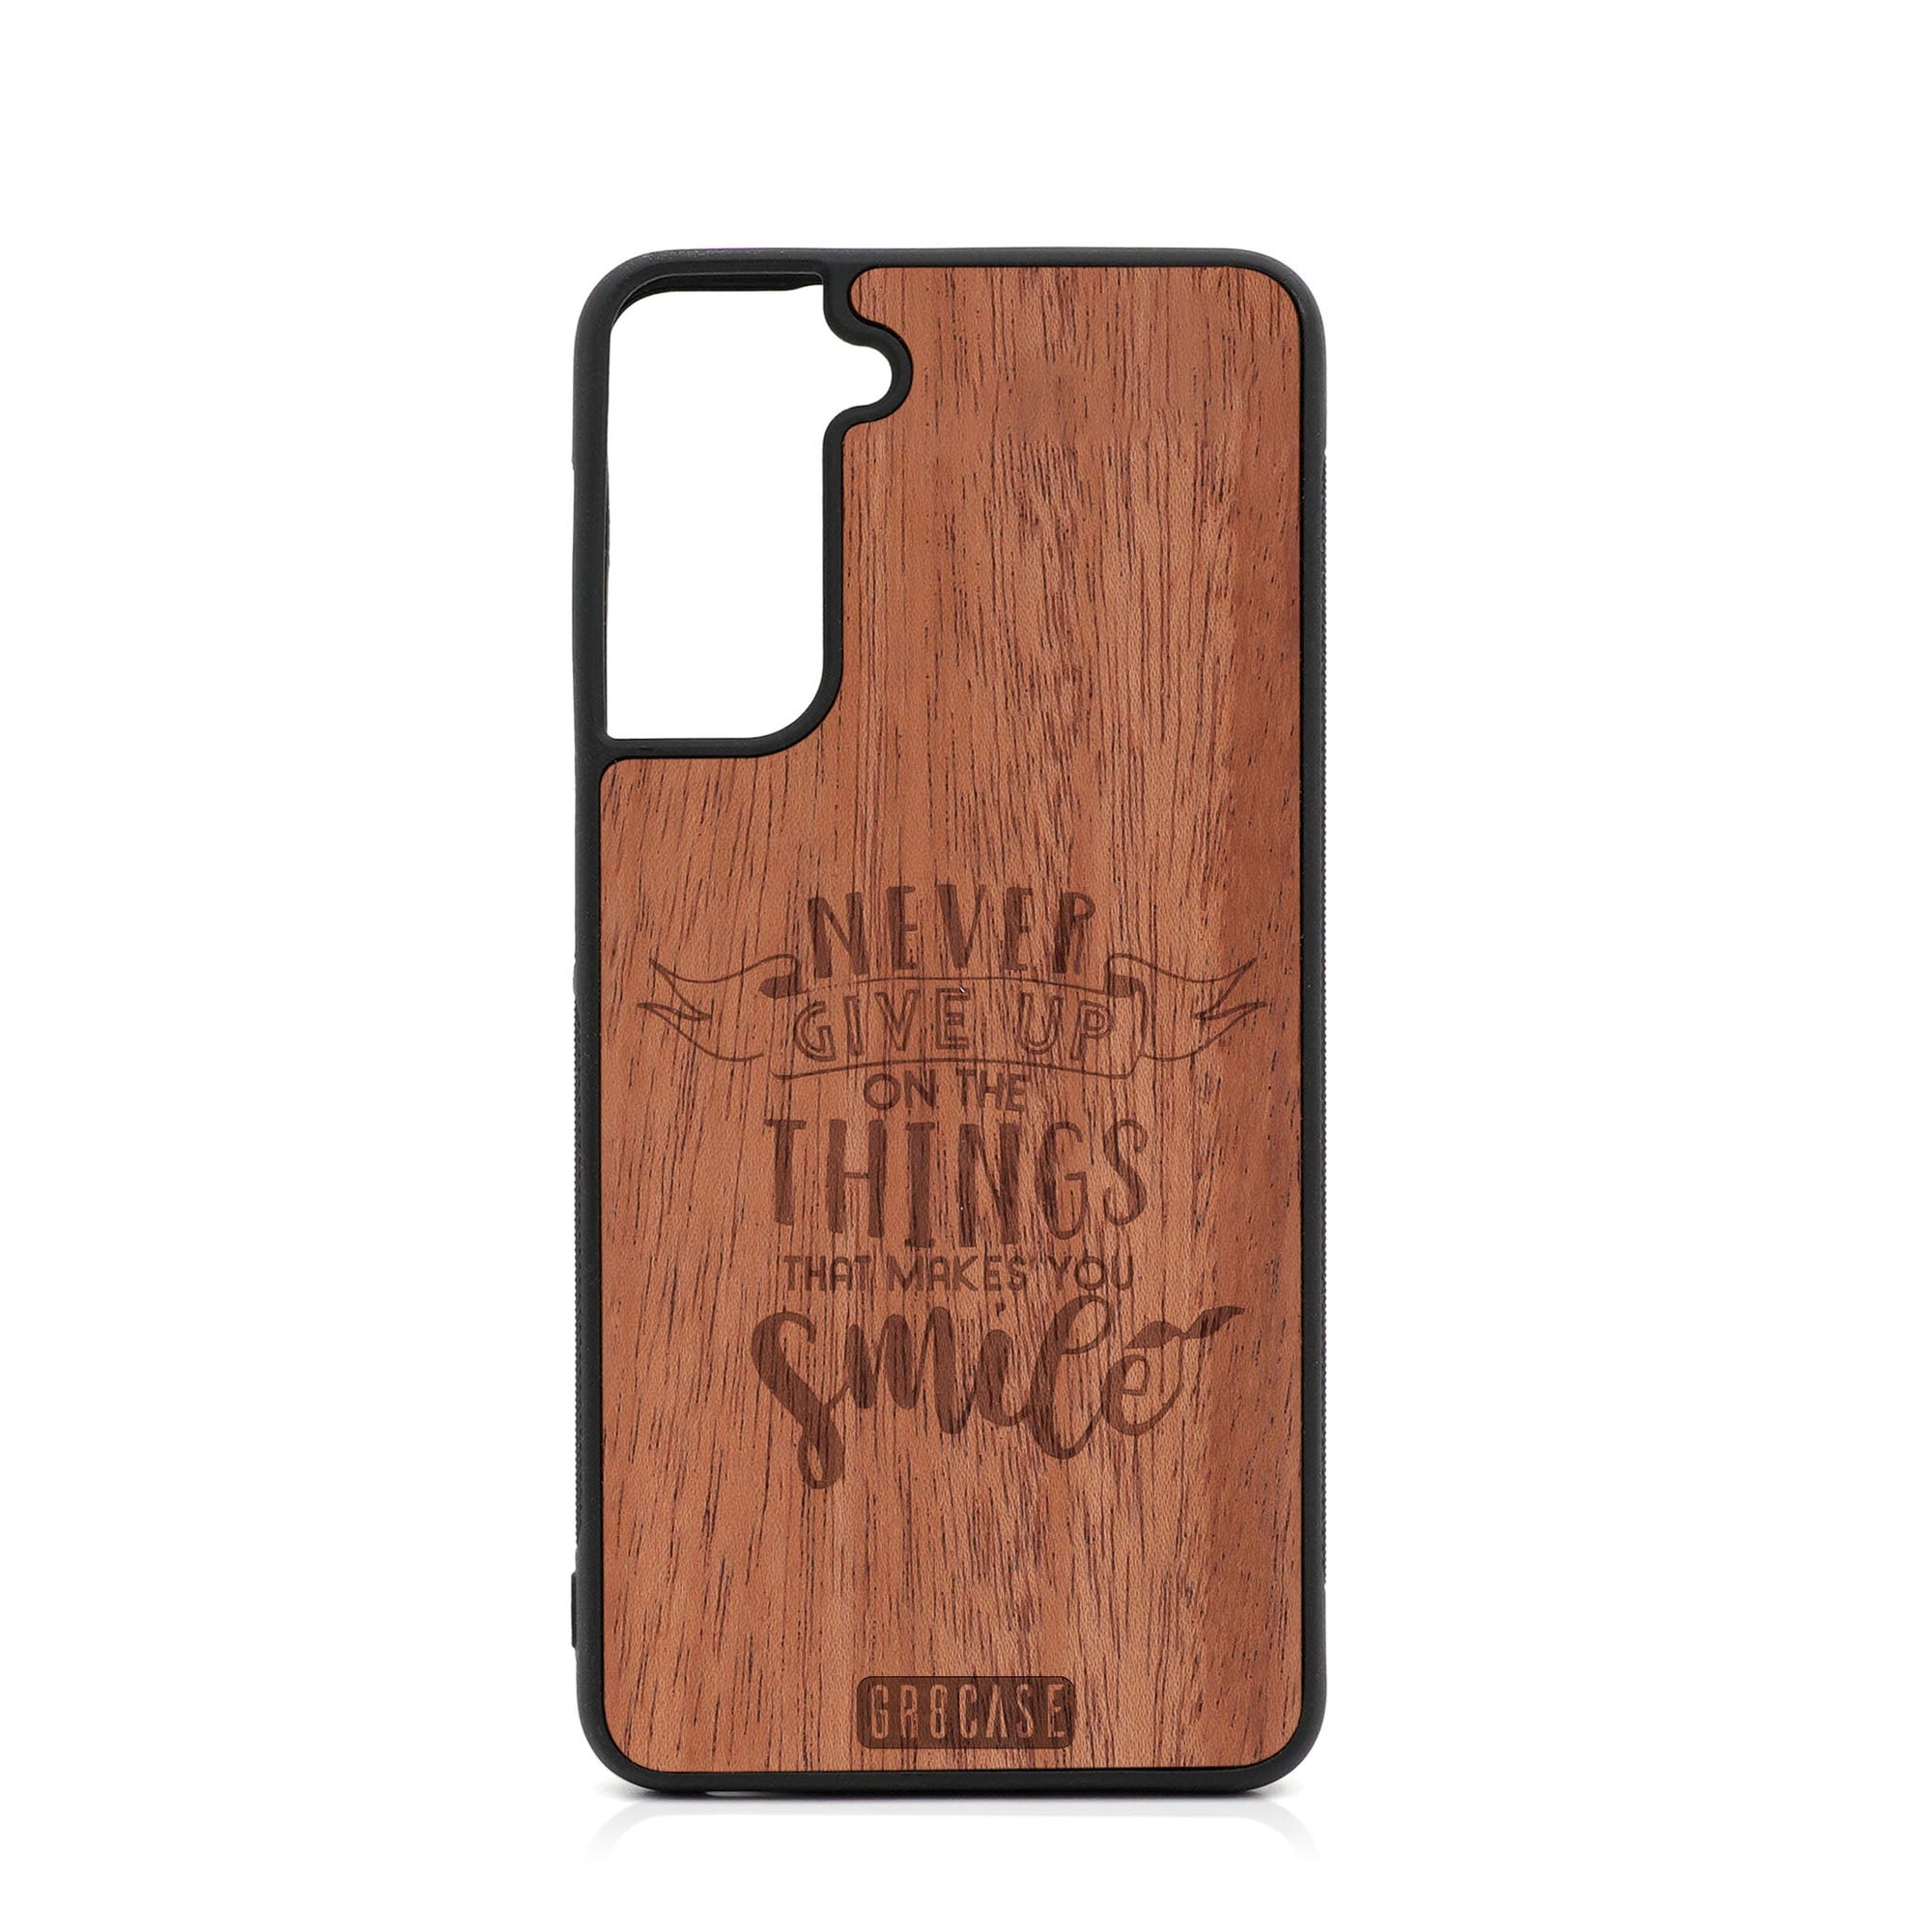 Never Give Up On The Things That Make You Smile Design Wood Case For Samsung Galaxy S22 Plus